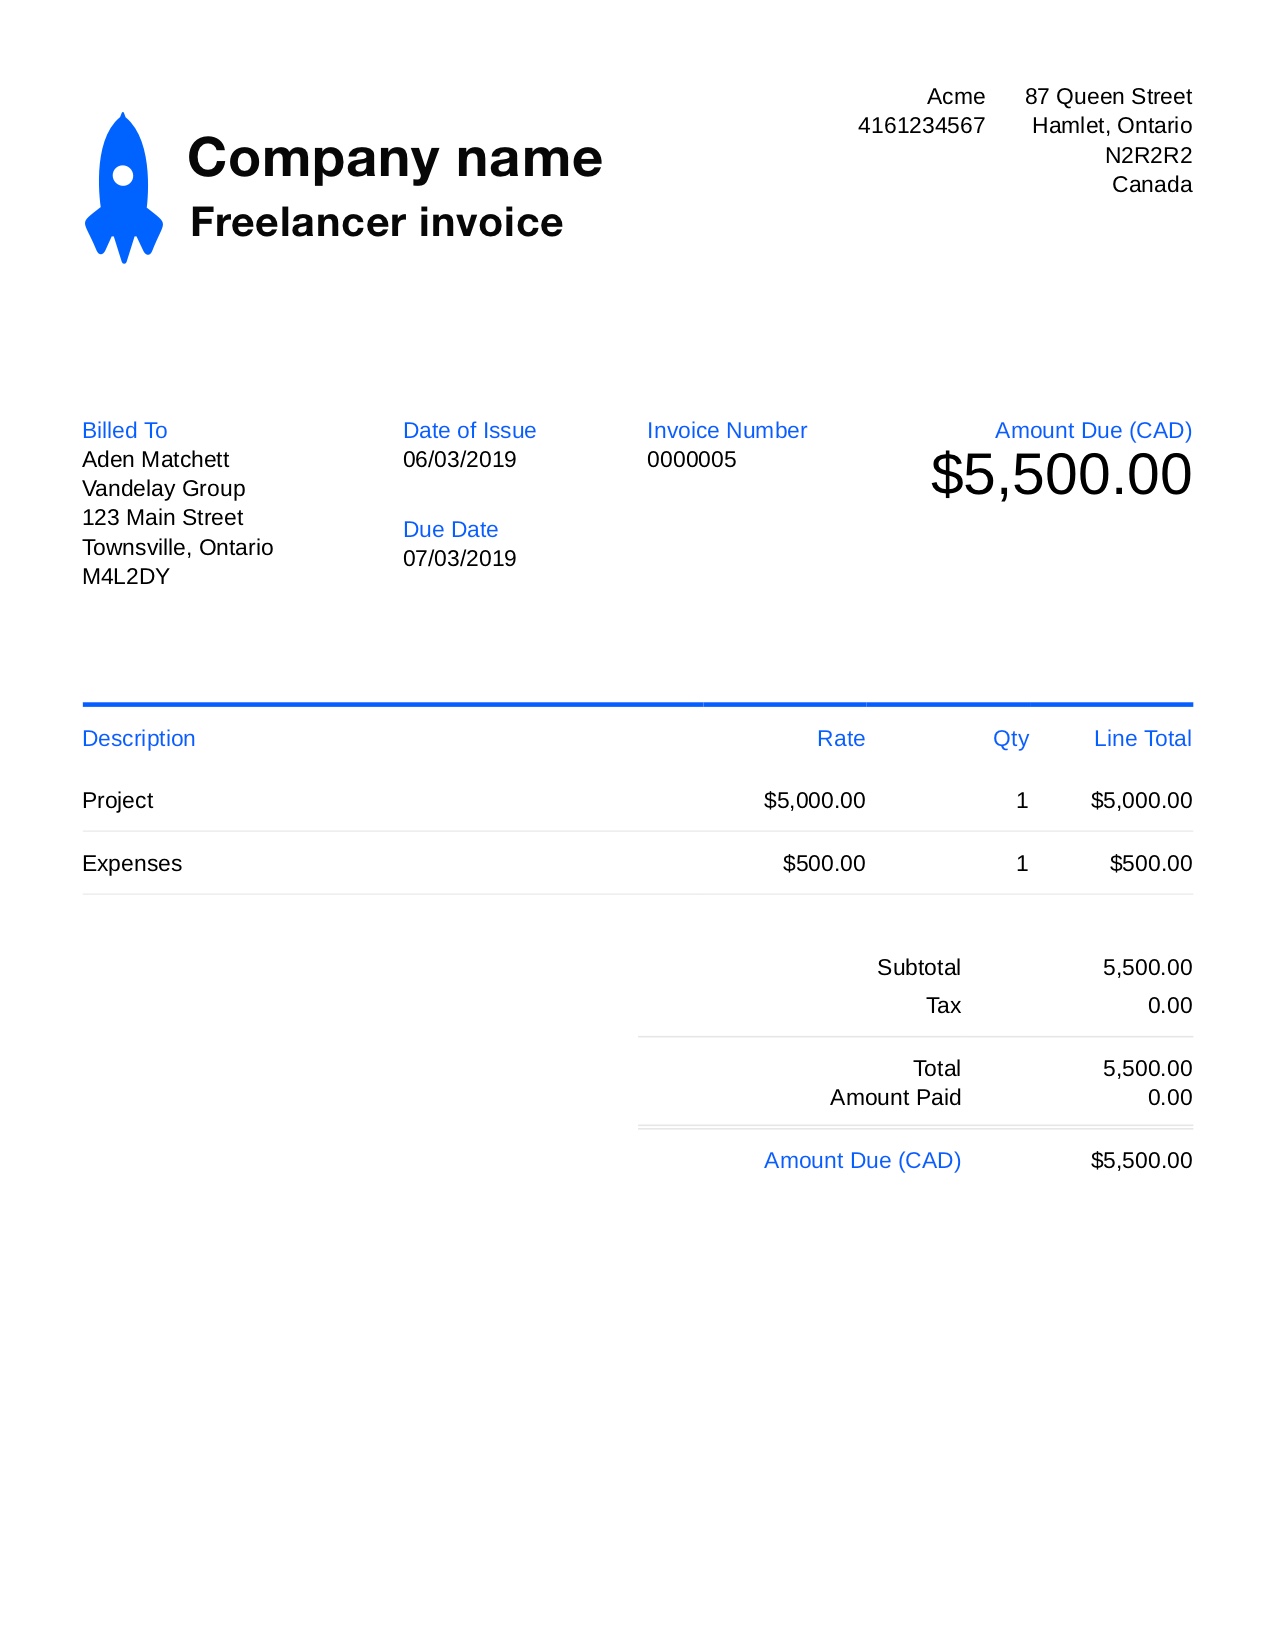 free-freelance-invoice-template-customize-and-send-in-90-seconds